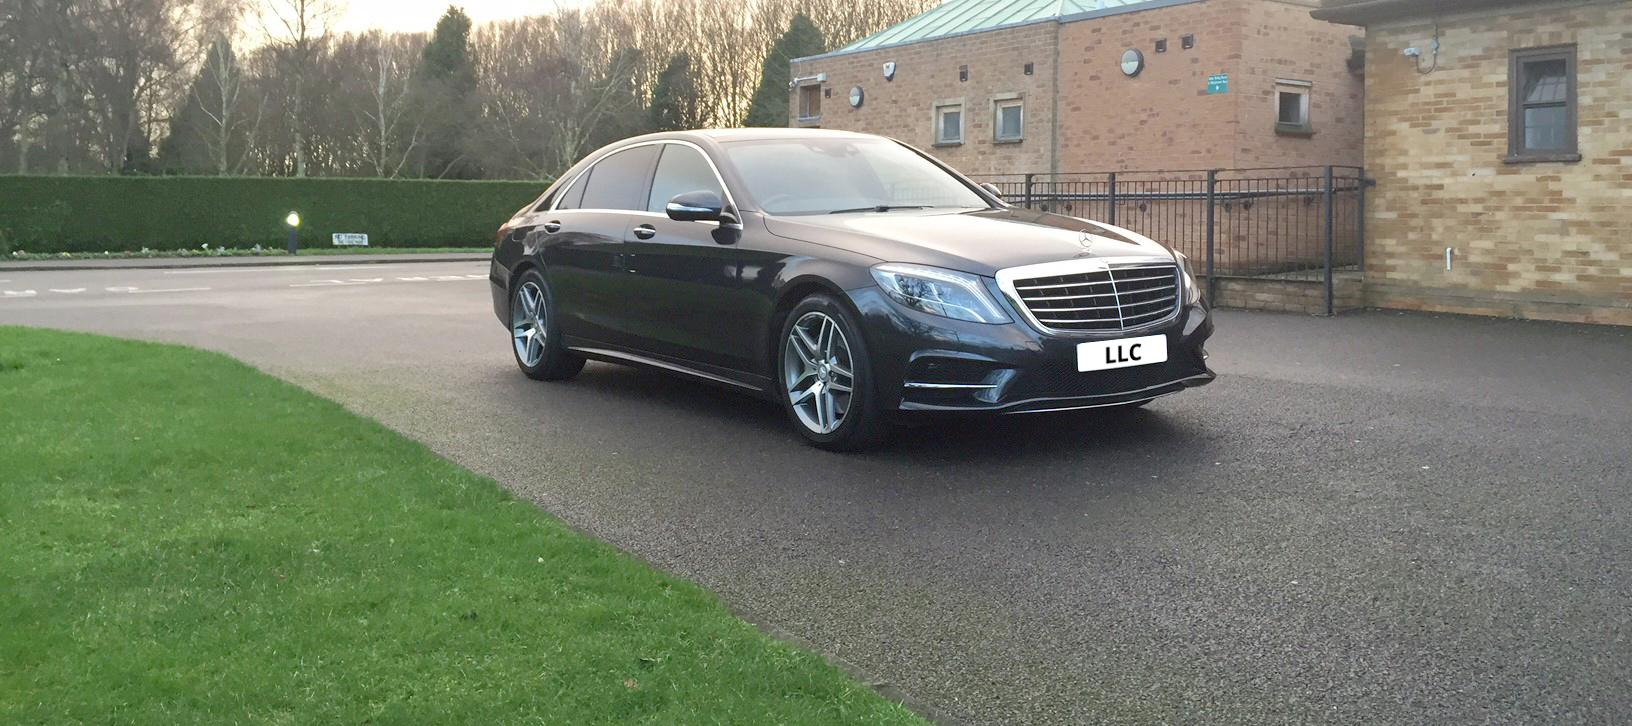 Mercedes S Class - Chauffeured Luxury Vehicle